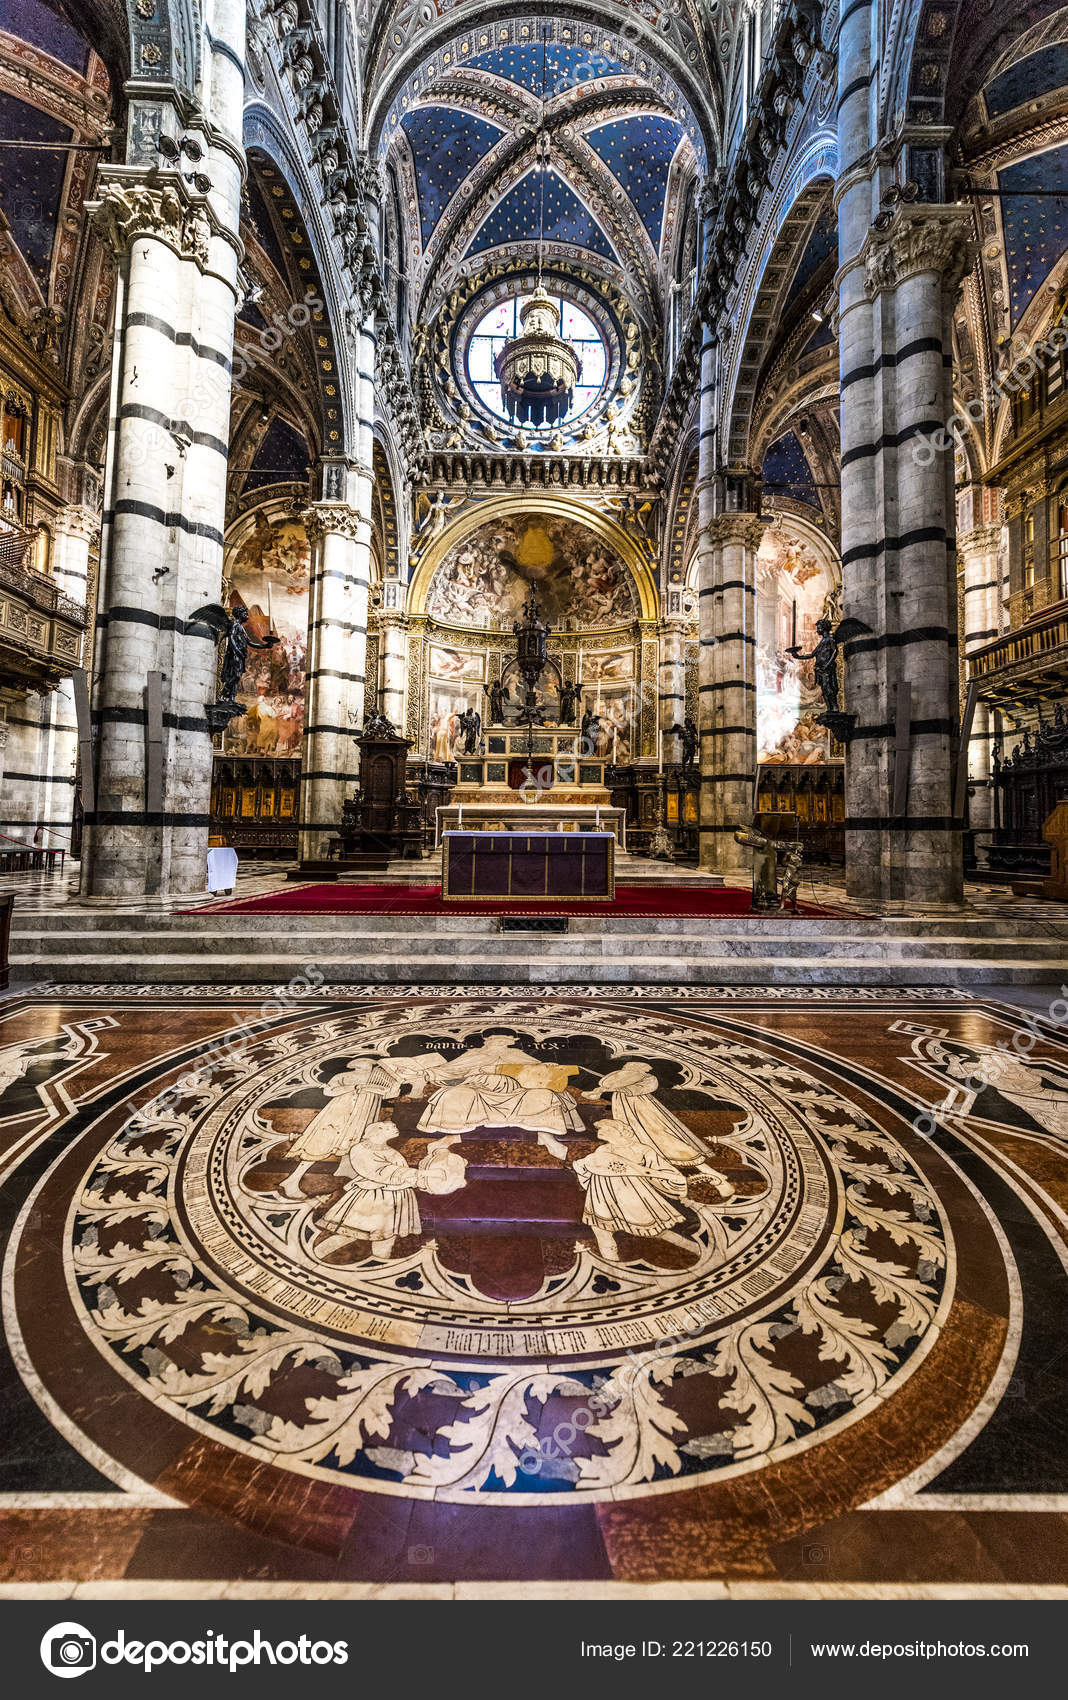 Interior Ornate Floor Mosaic Siena Cathedral Florence Italy Europe